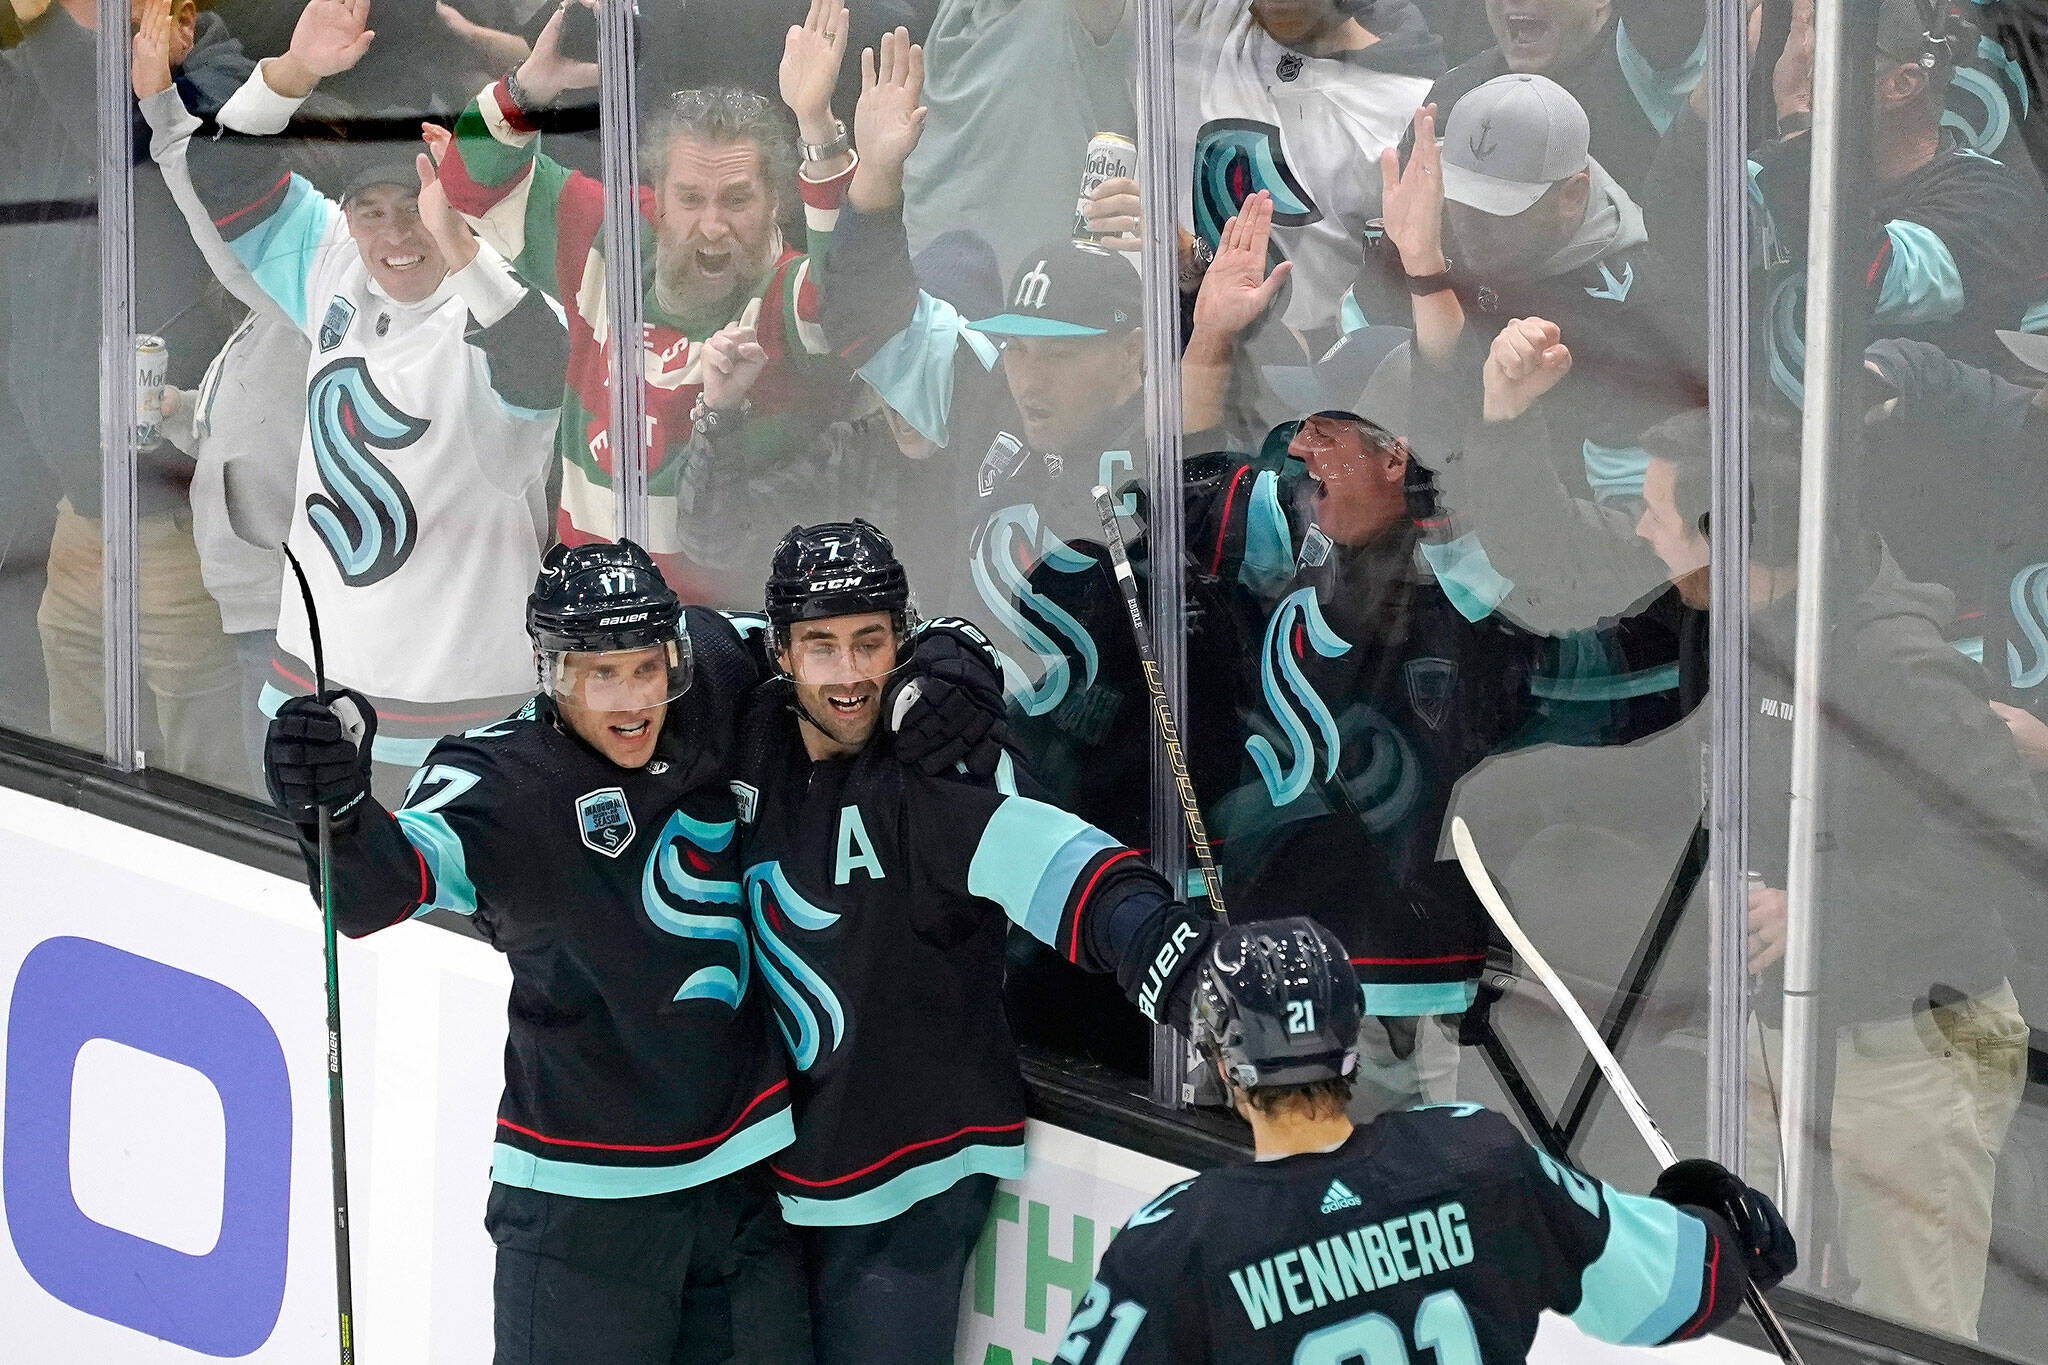 Fans cheer as the Kraken’s Jordan Eberle (center) is congratulated by teammates on his third goal of the night against the Sabres on Thursday in Seattle. (AP Photo/Elaine Thompson)